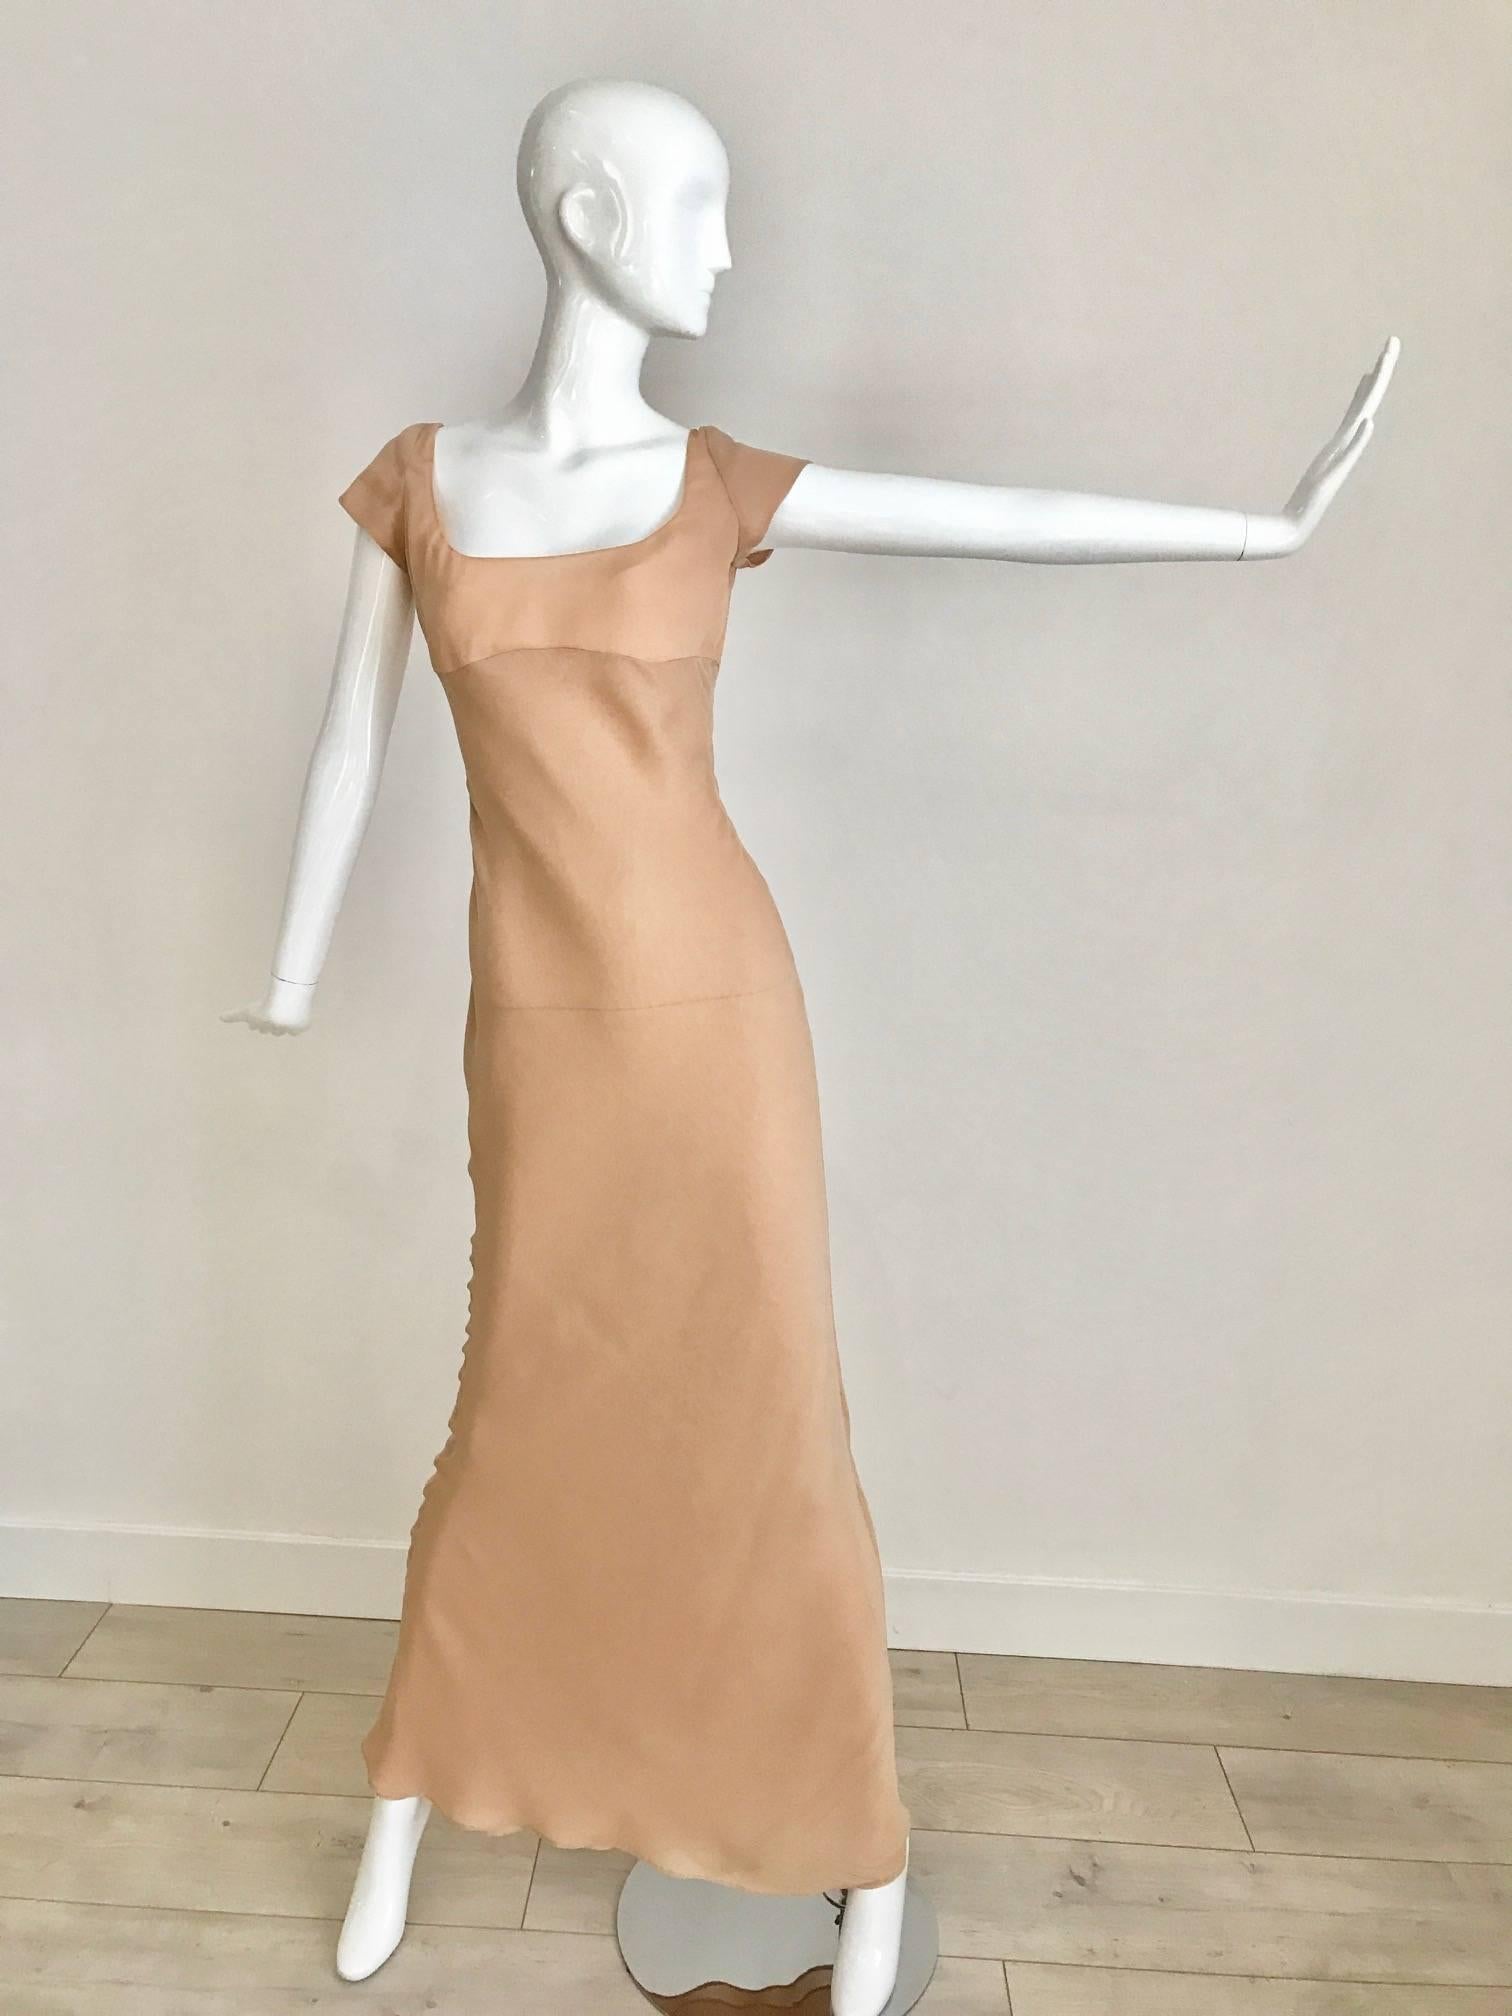 1990s Richard Tyler cap sleeves  Light Tan or nude Silk Chiffon bias cut  Gown.
Zip on the side, Gown cut in bias. 
Fit Size Small - 2/4
Bust: 32 inch
Waist: 27 inch
Hip: 34 inch / Dress length: 66 inch